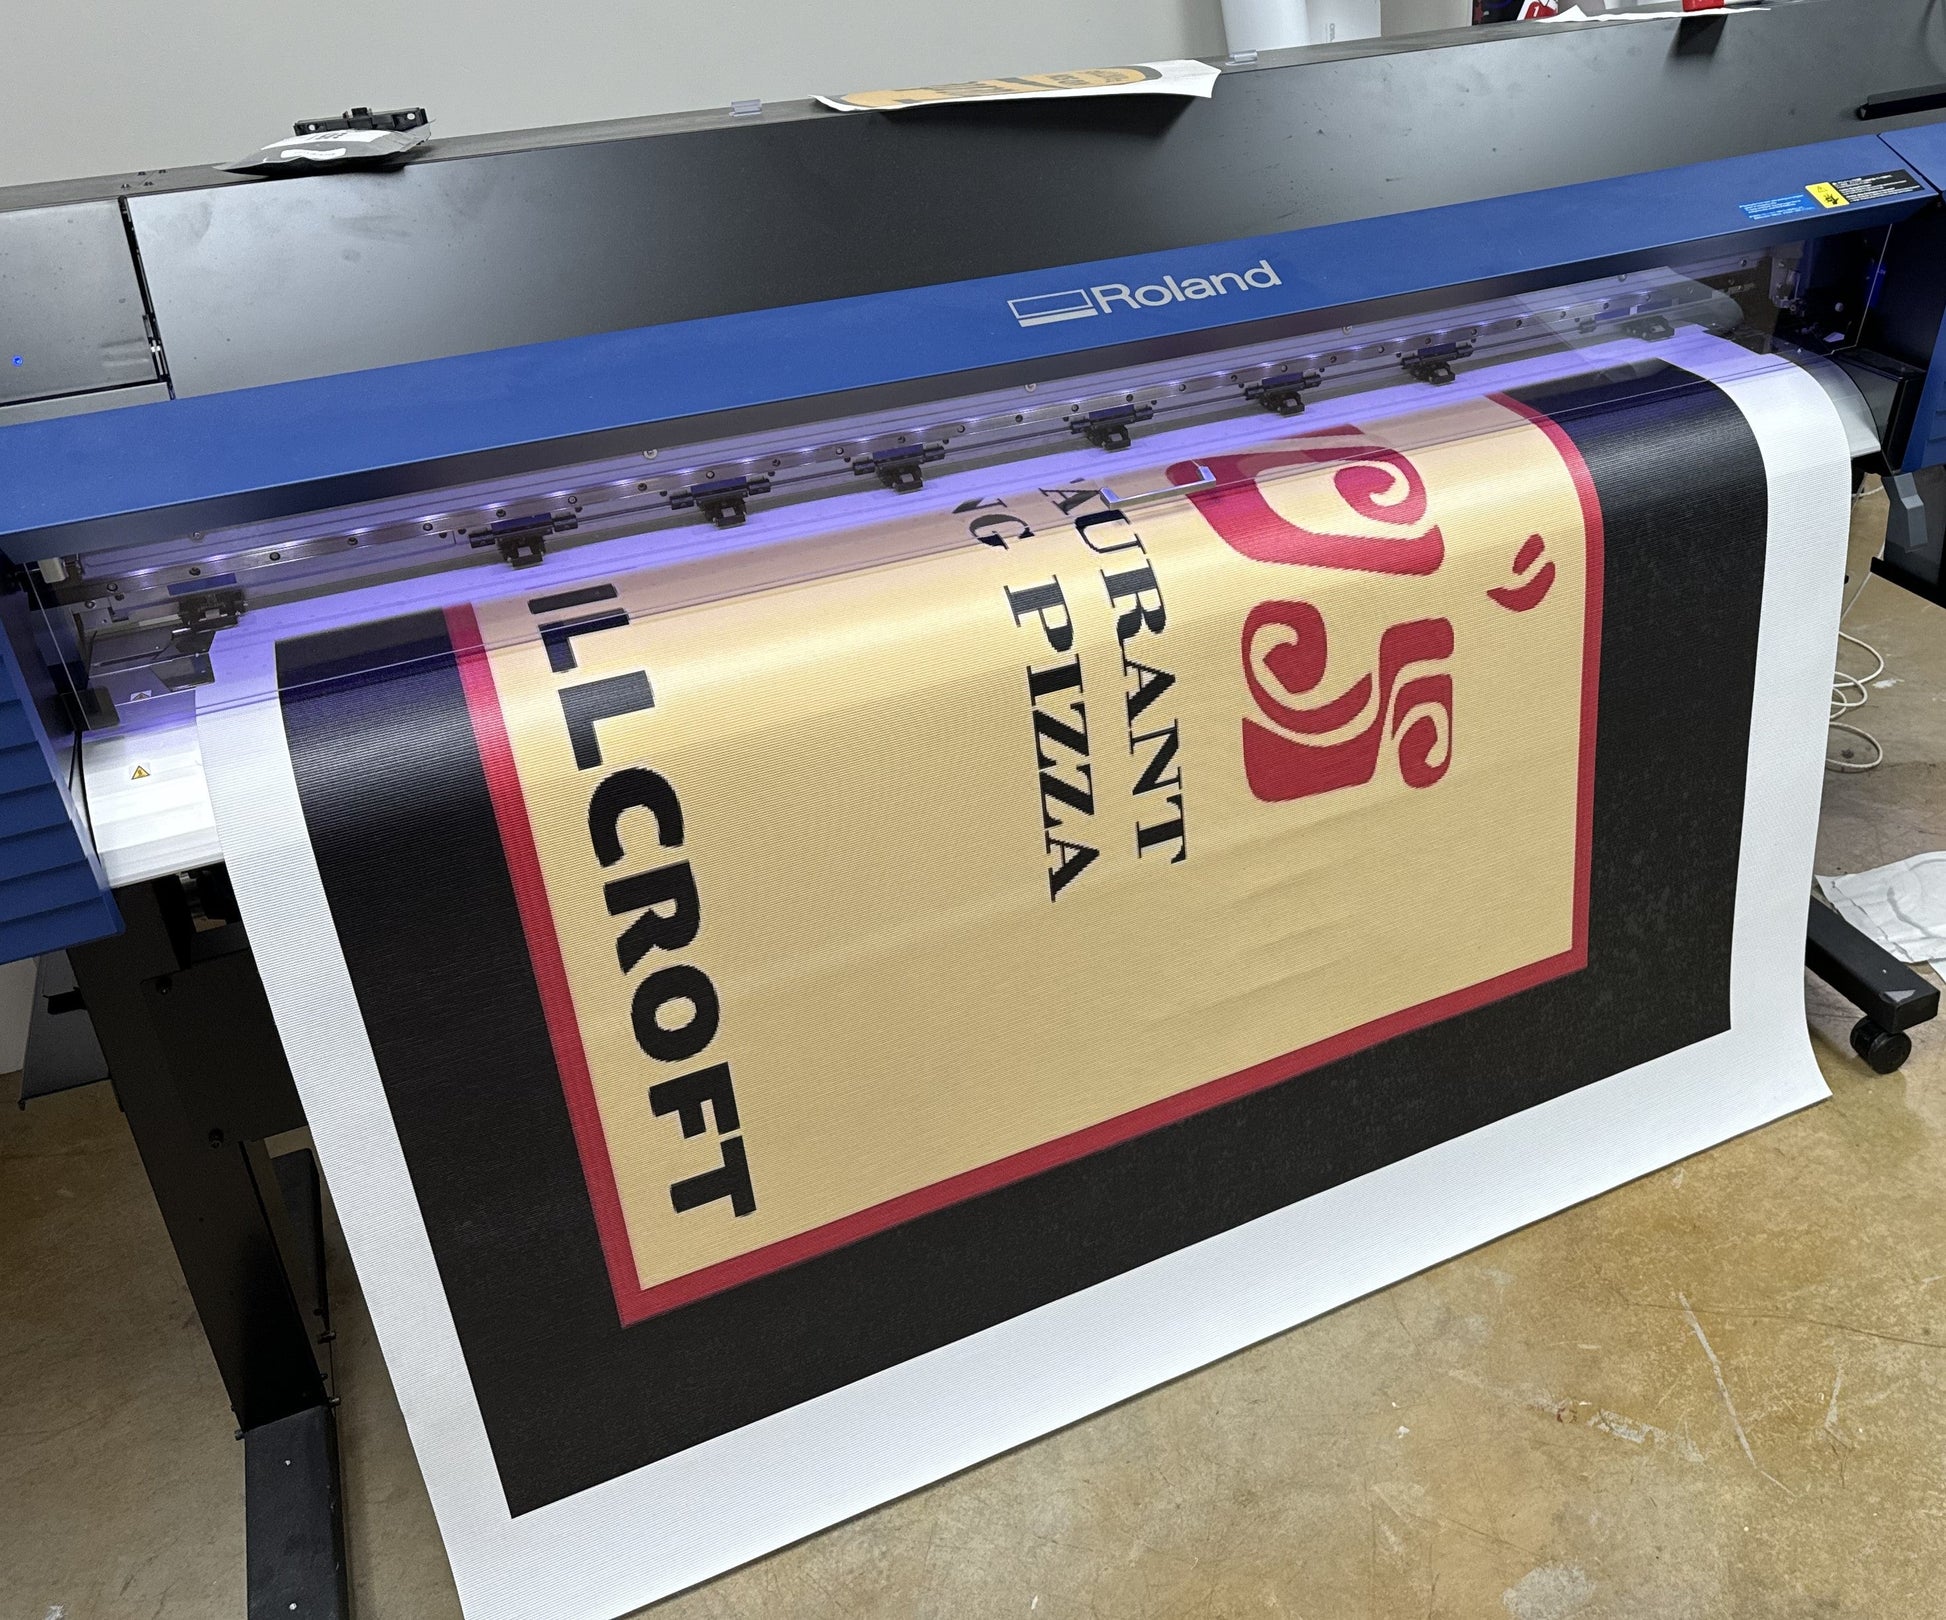 Custom Mesh Indoor/Outdoor Banner by Show Off Your Threads custom printed for "Grant's Pizza" on a Roland digital printer in a printshop workspace. The banner is yellow with red and black text detailing the business name.